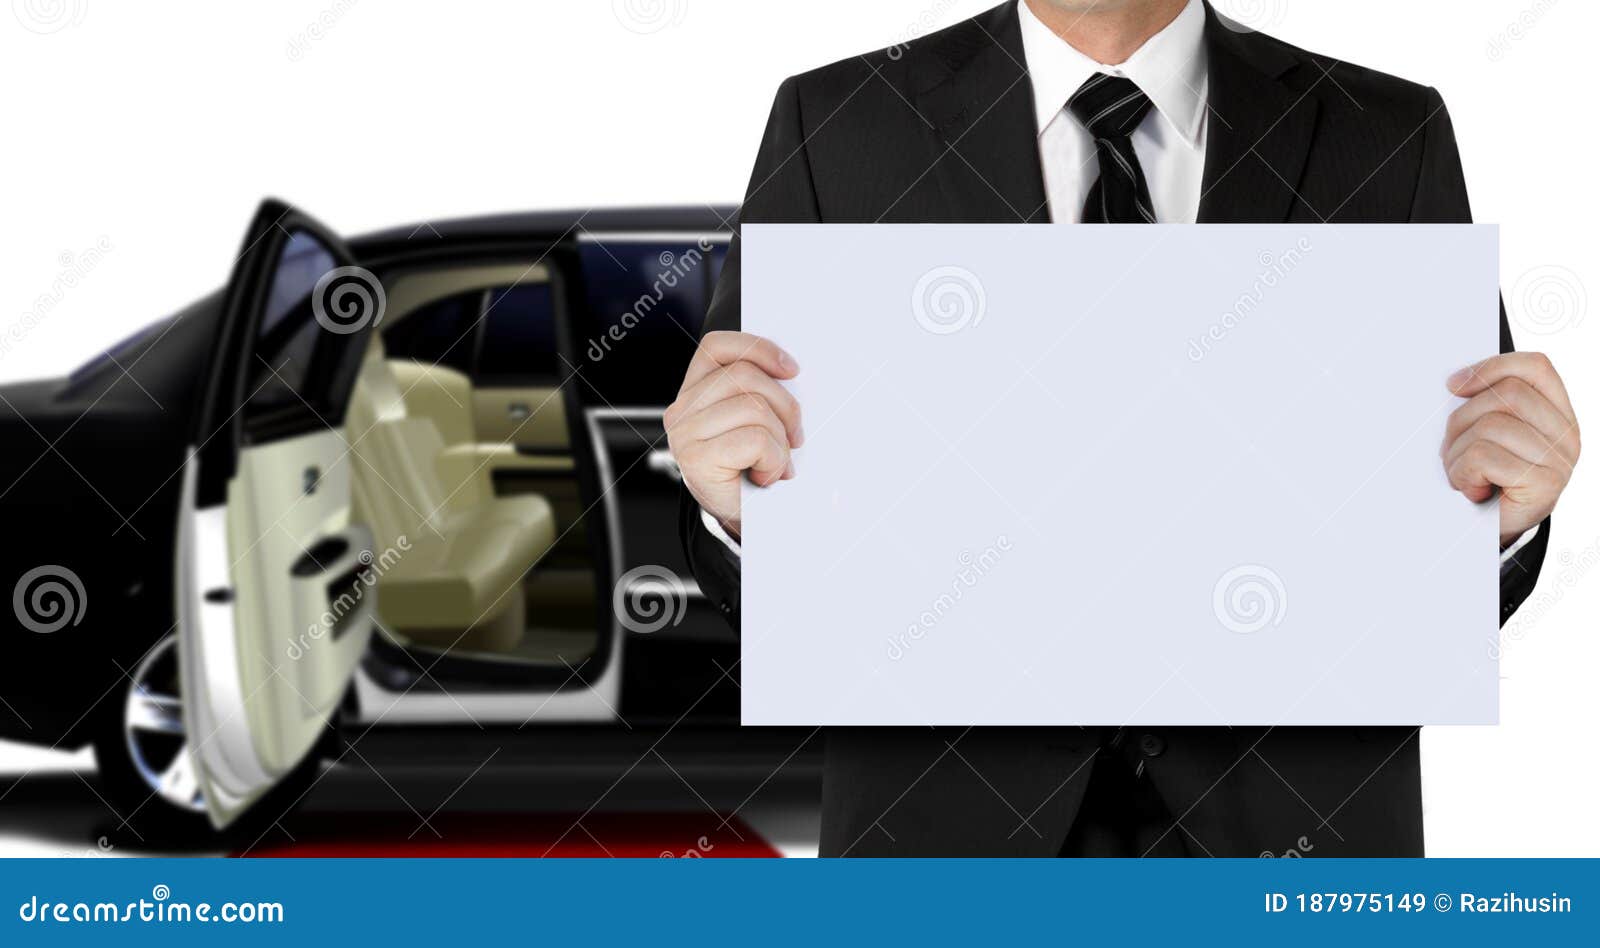 Chauffeur Holding Signage Waiting for Passenger Image - Image of automobile, suit: 187975149